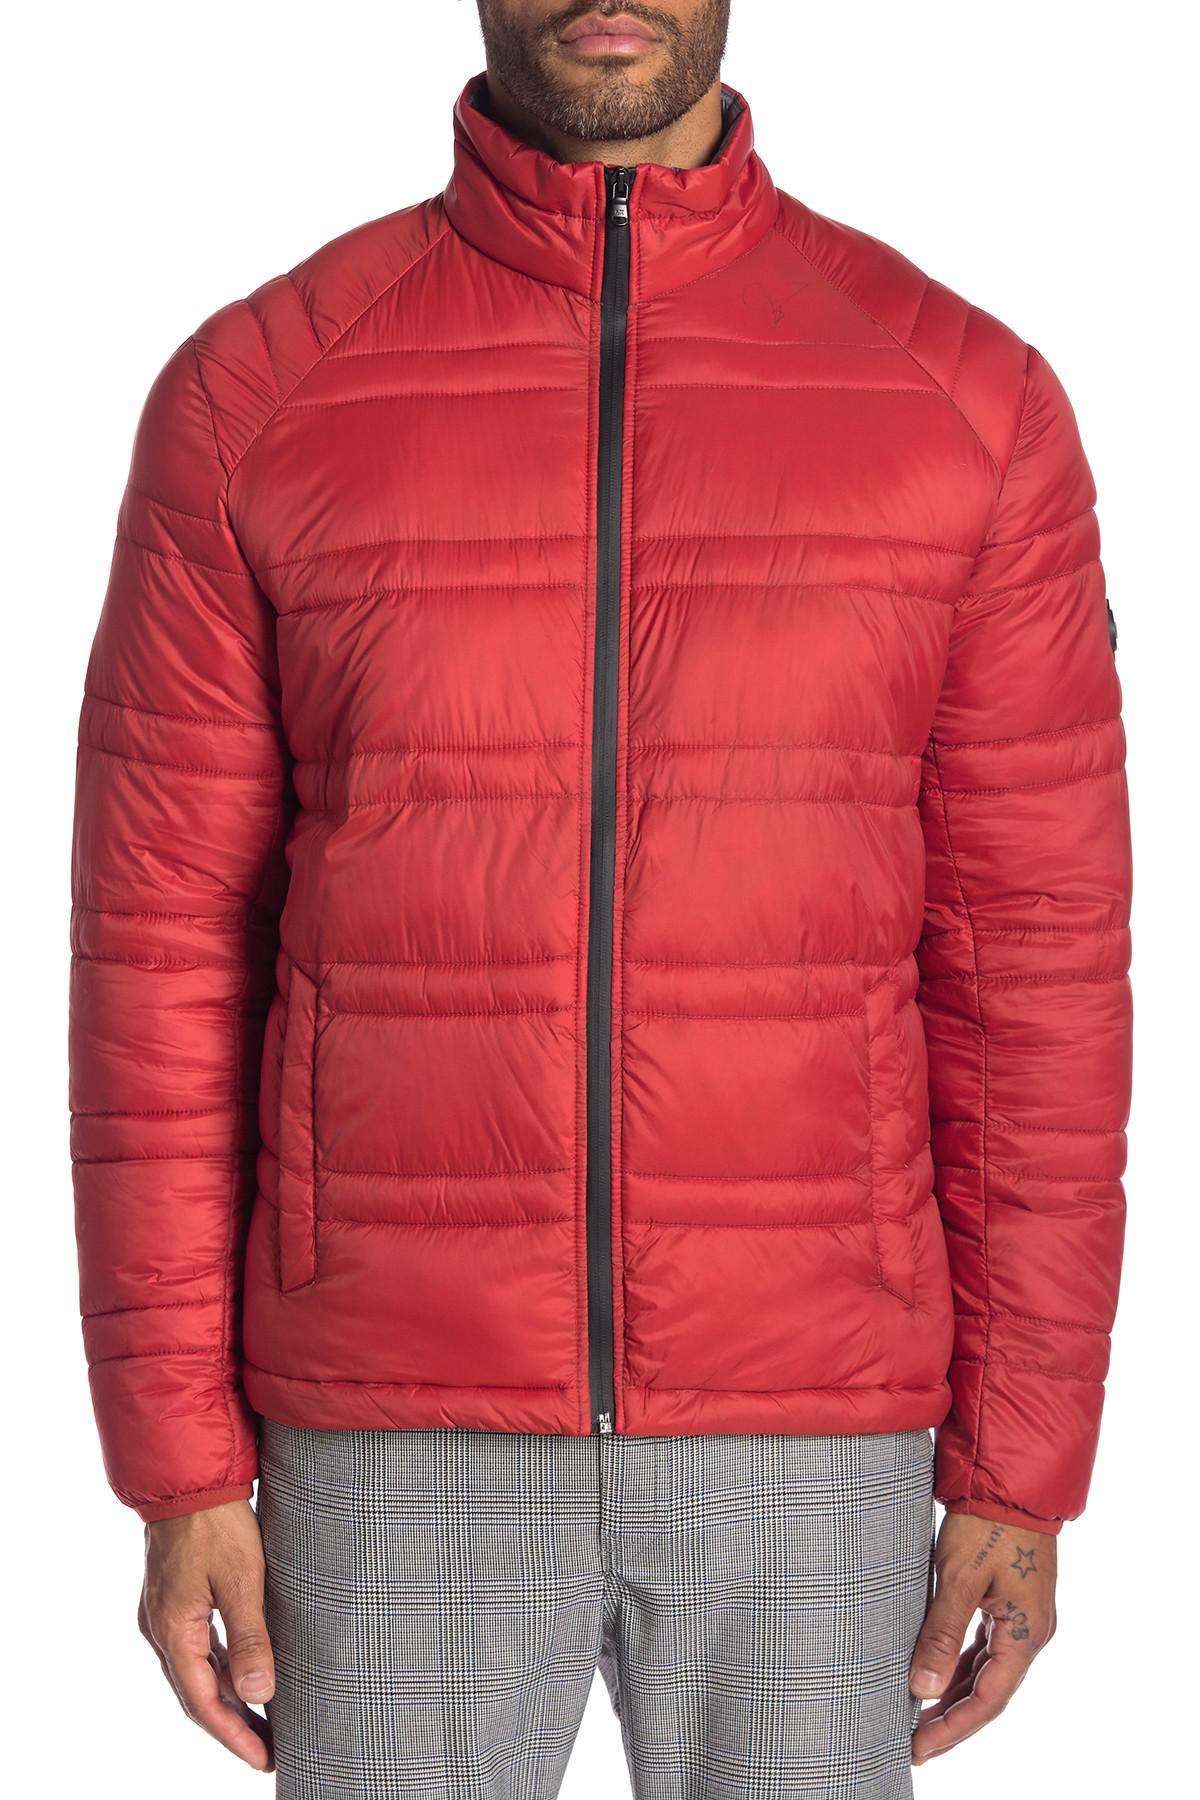 Hill Hipster Jacket in Red for Men - Lyst